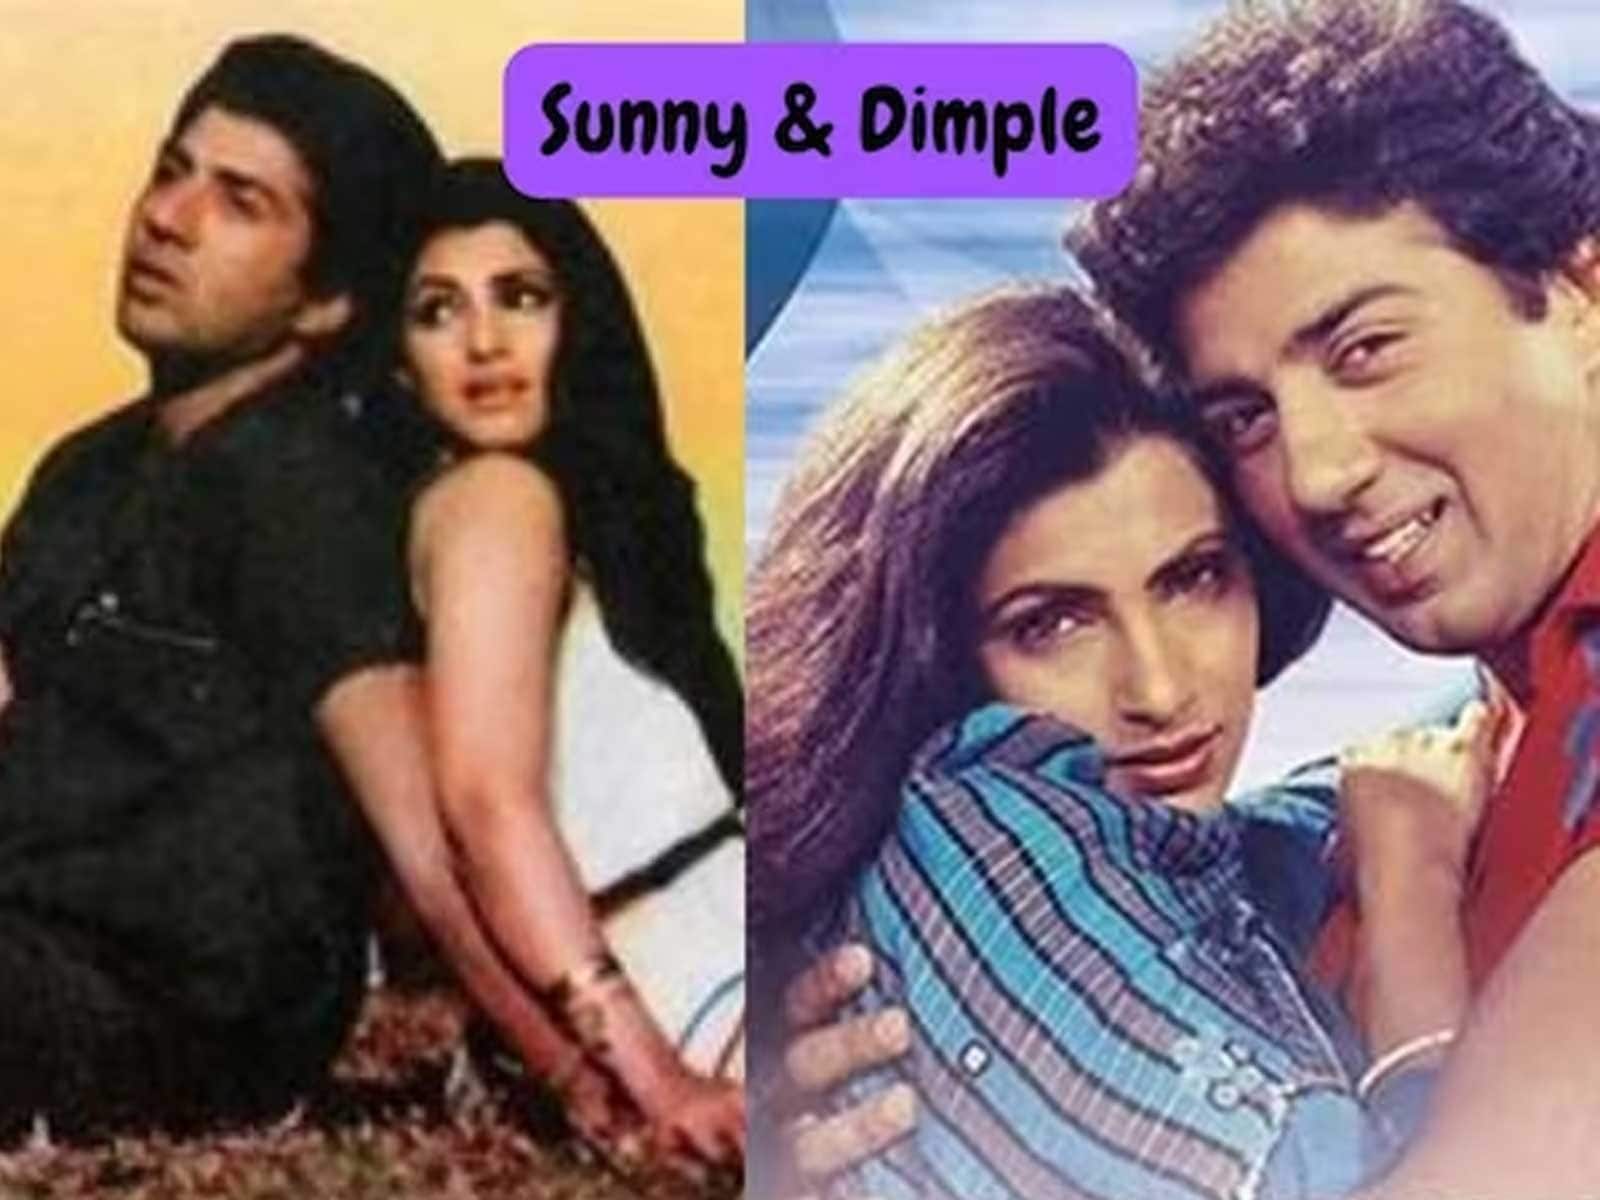 Dimple Kapadia Ki Bp Sex Hd Video - Did Sunny Deol And Dimple Kapadia Date Each Other Back In The 80s? - News18